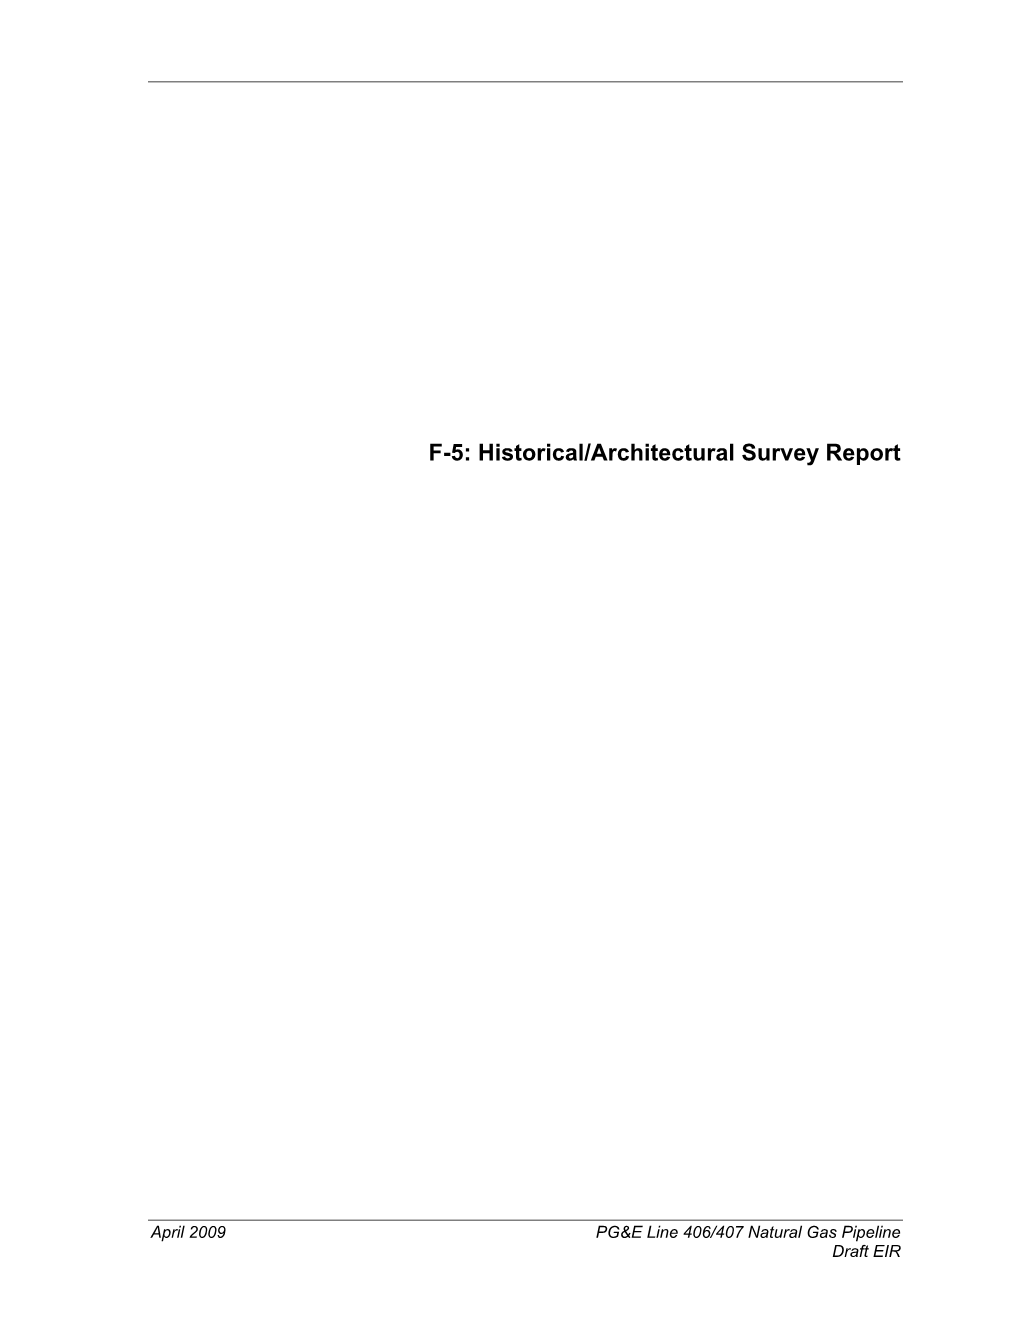 F-5: Historical/Architectural Survey Report